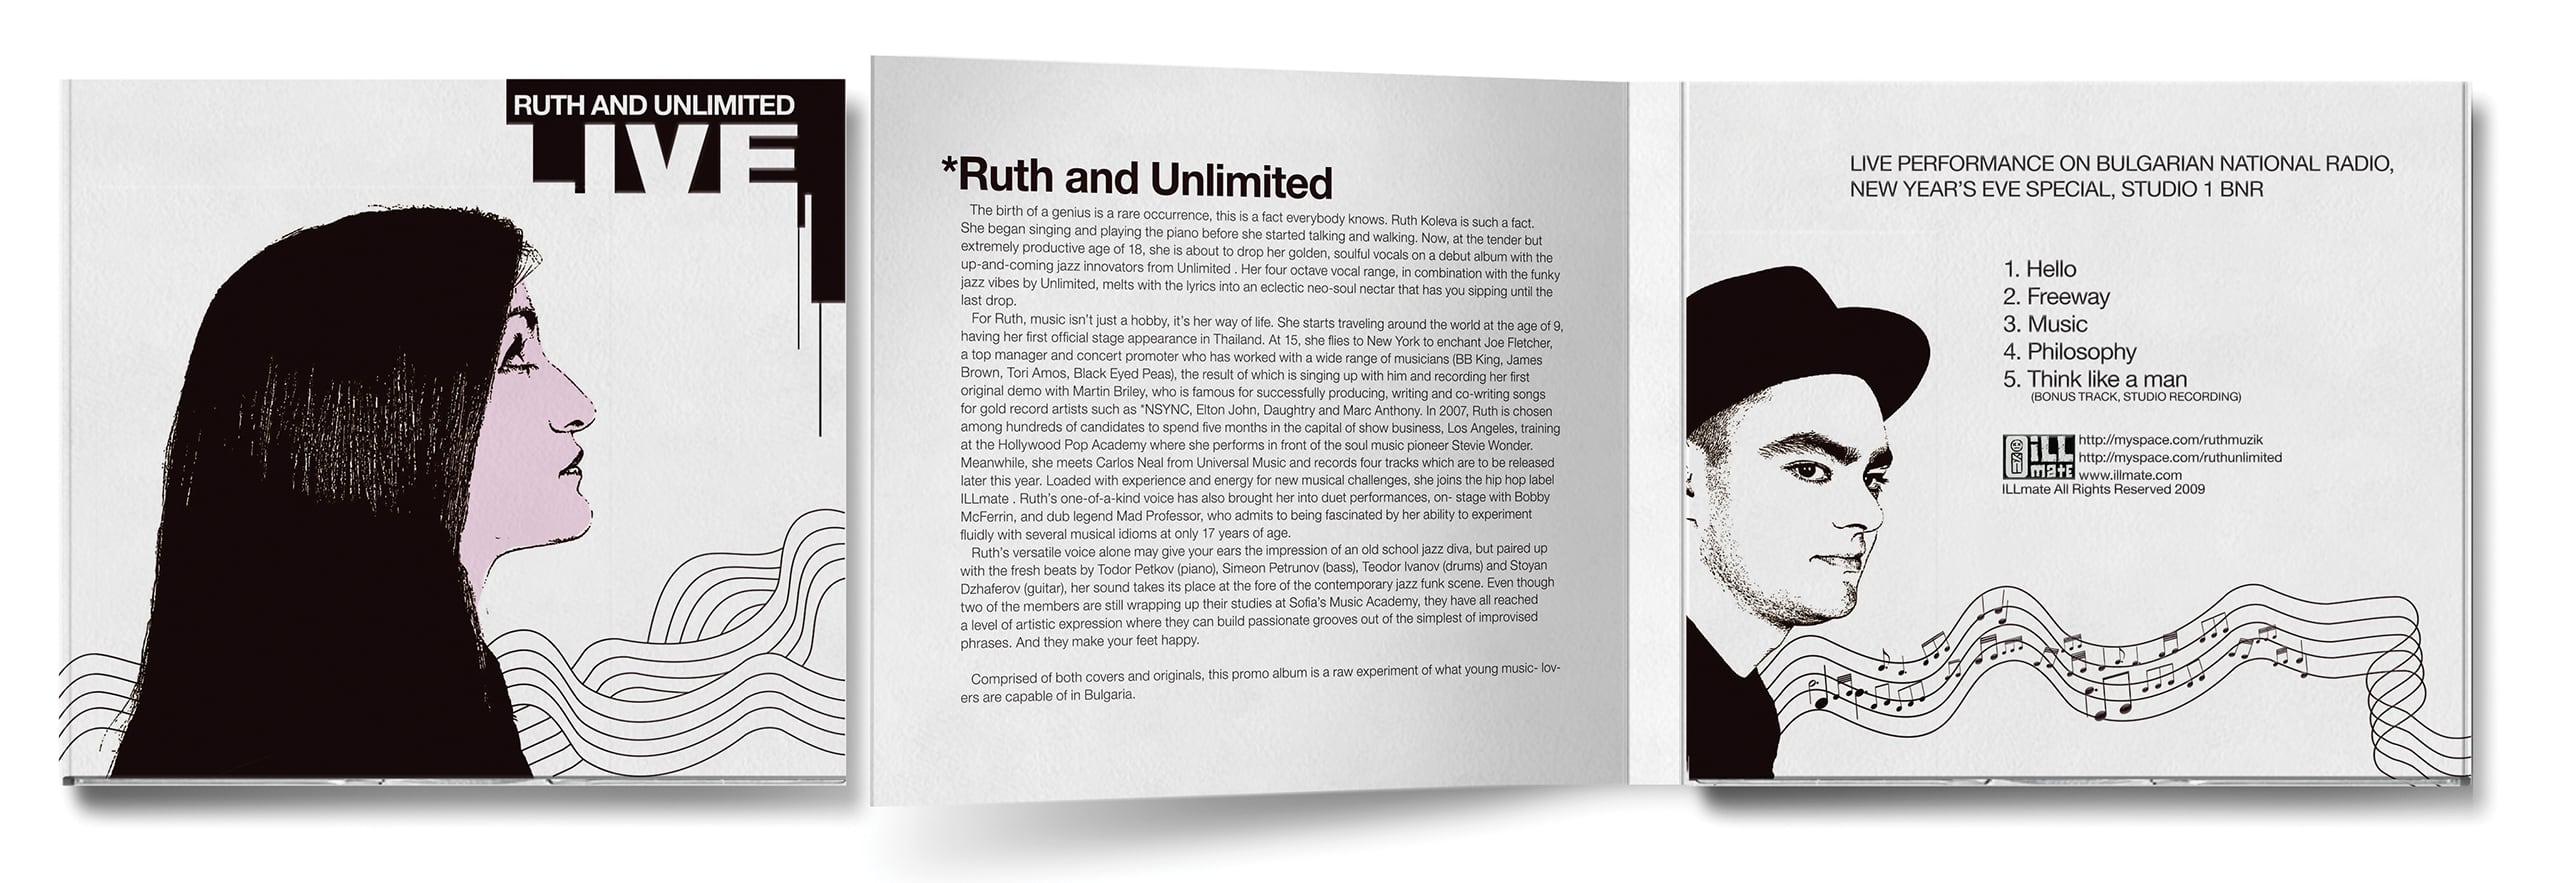 Ruth and Unlimited Album Artwork